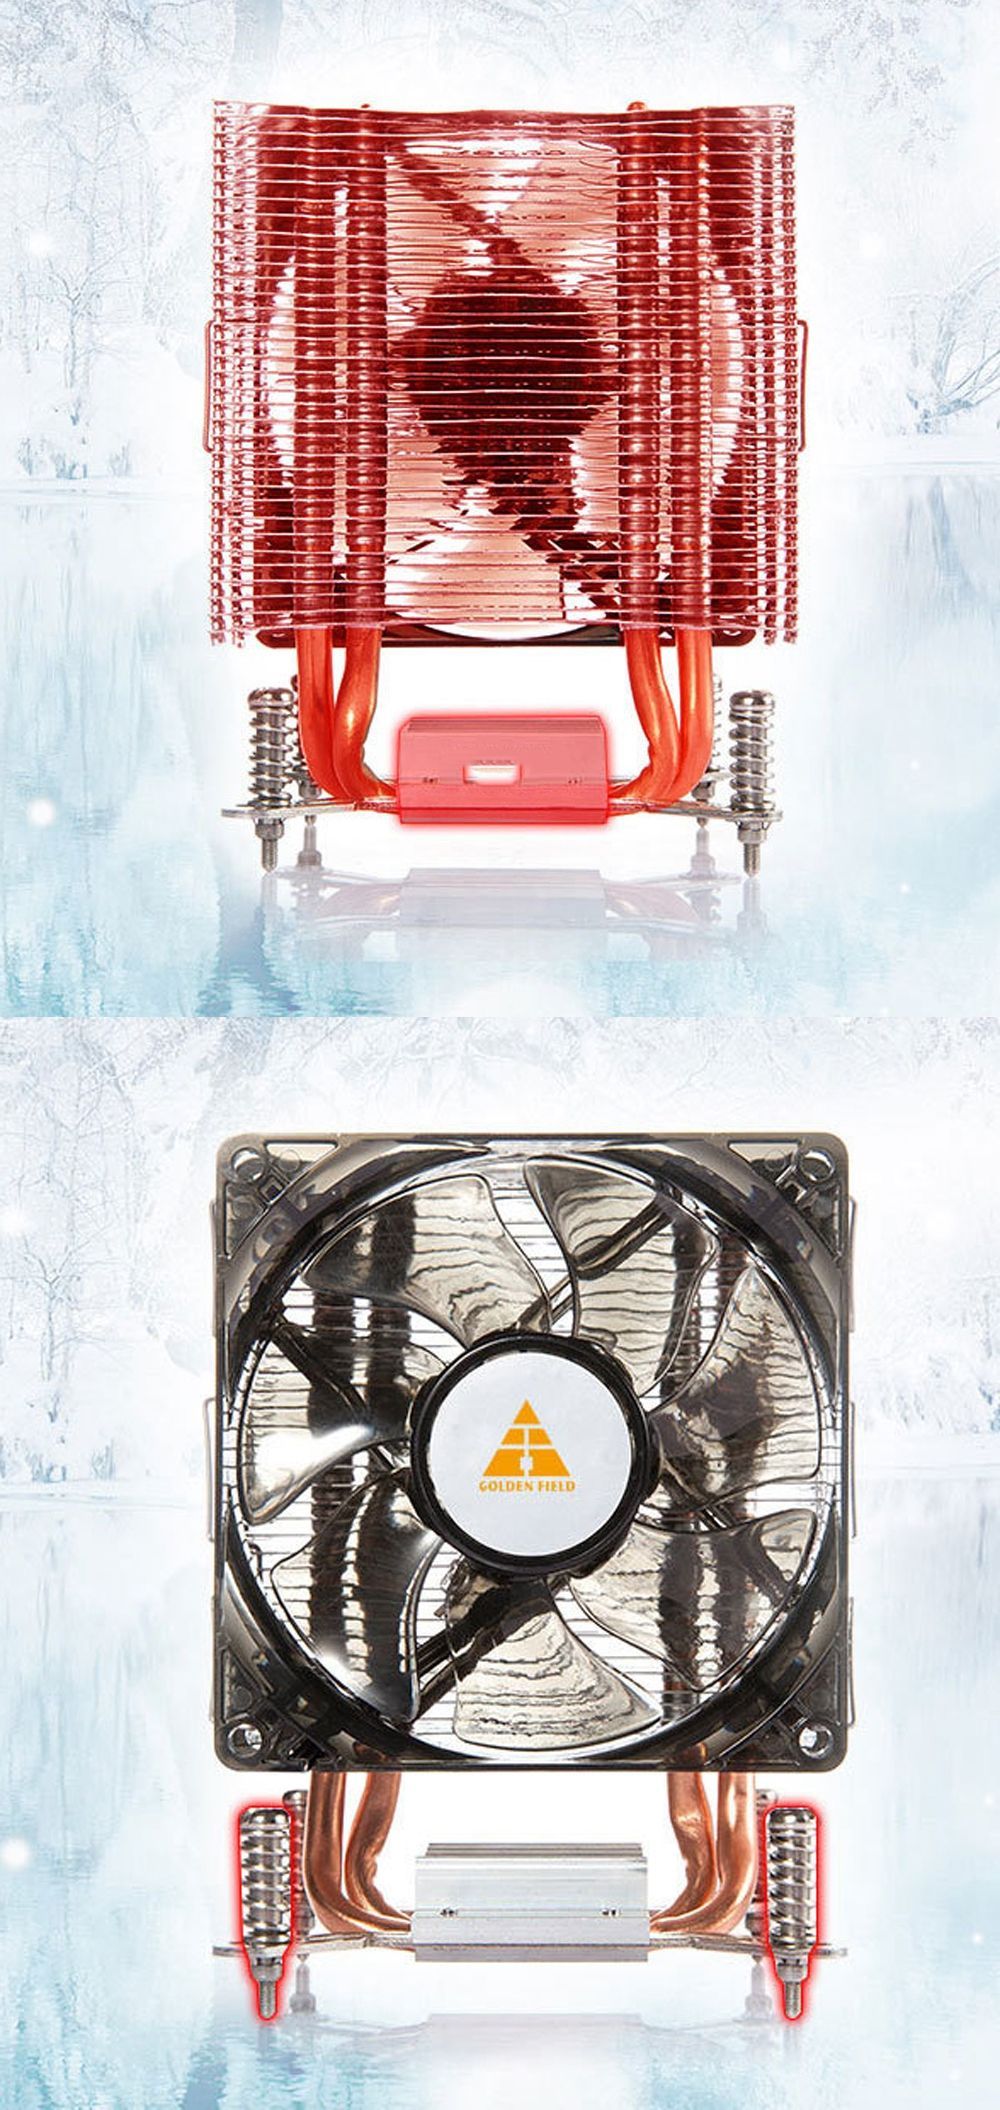 K160-1PCS-90mm-CPU-Cooler-U-shaped-Double-Heat-Pipes-Mute-LED-Backlit-CPU-Cooling-Fan-with-Thermal-S-1600499